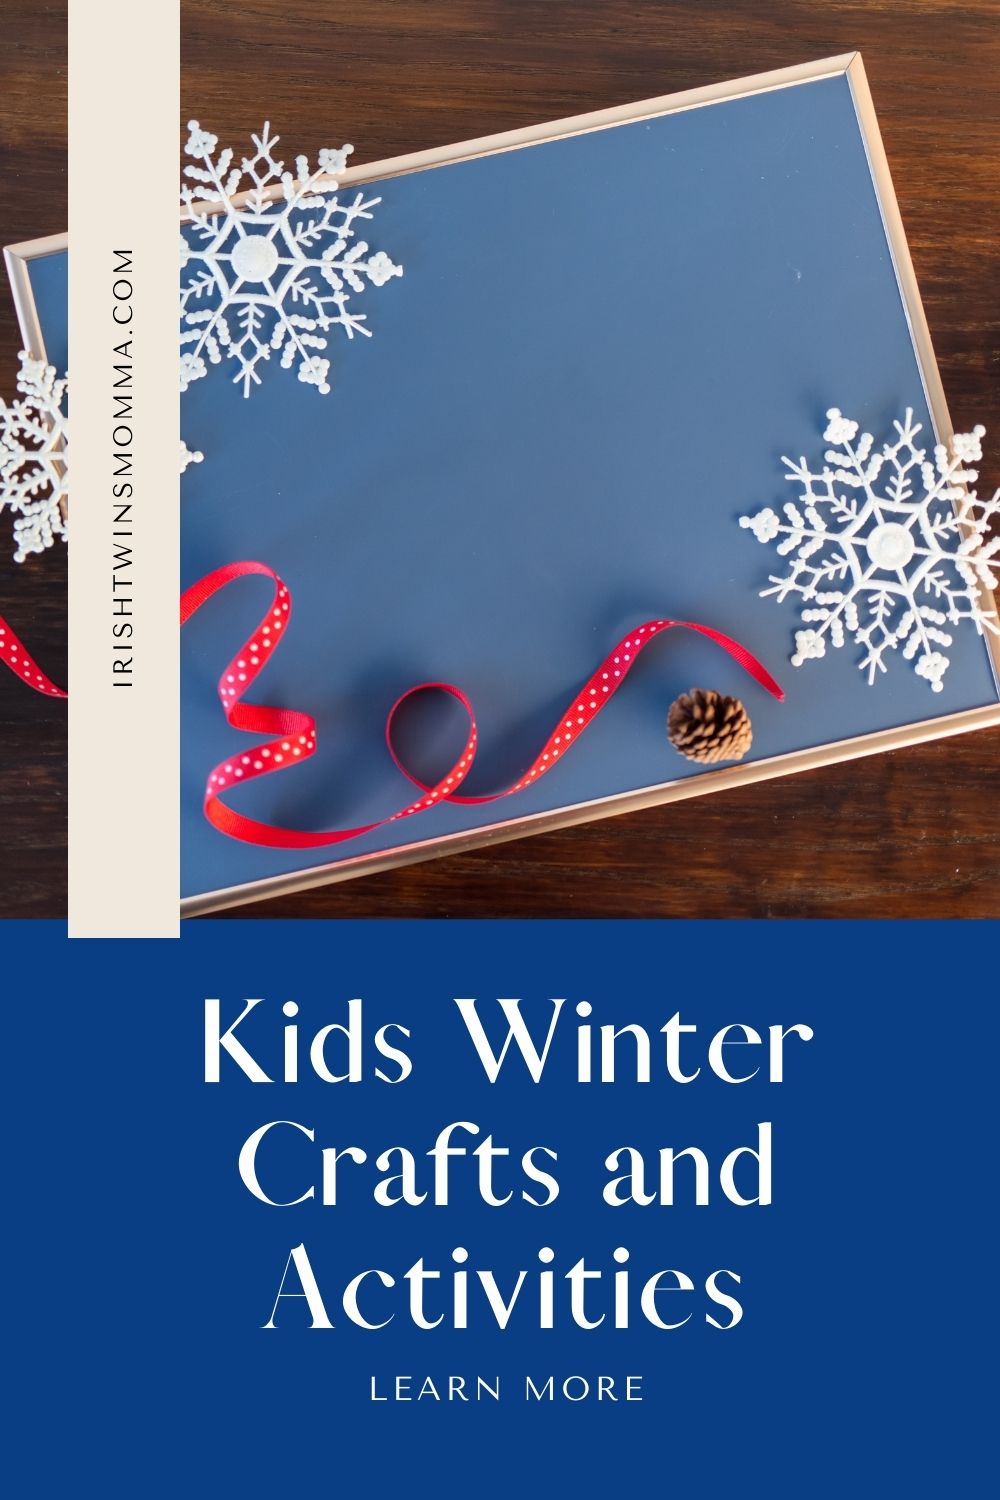 Sometimes in the winter, the weather can trap you inside. With these winter activities and crafts, you can make masterpieces and enjoy winter again! via @irishtwinsmom11